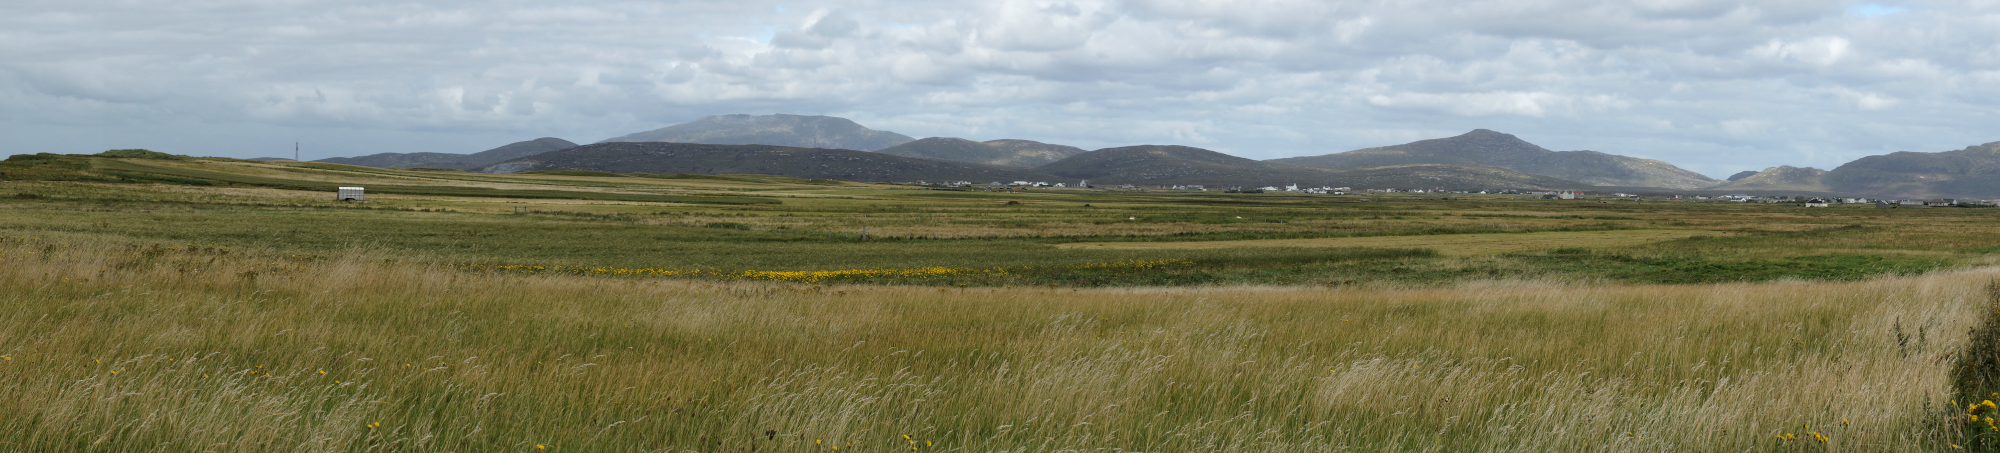 Machair in South Uist at risk from sea level rise